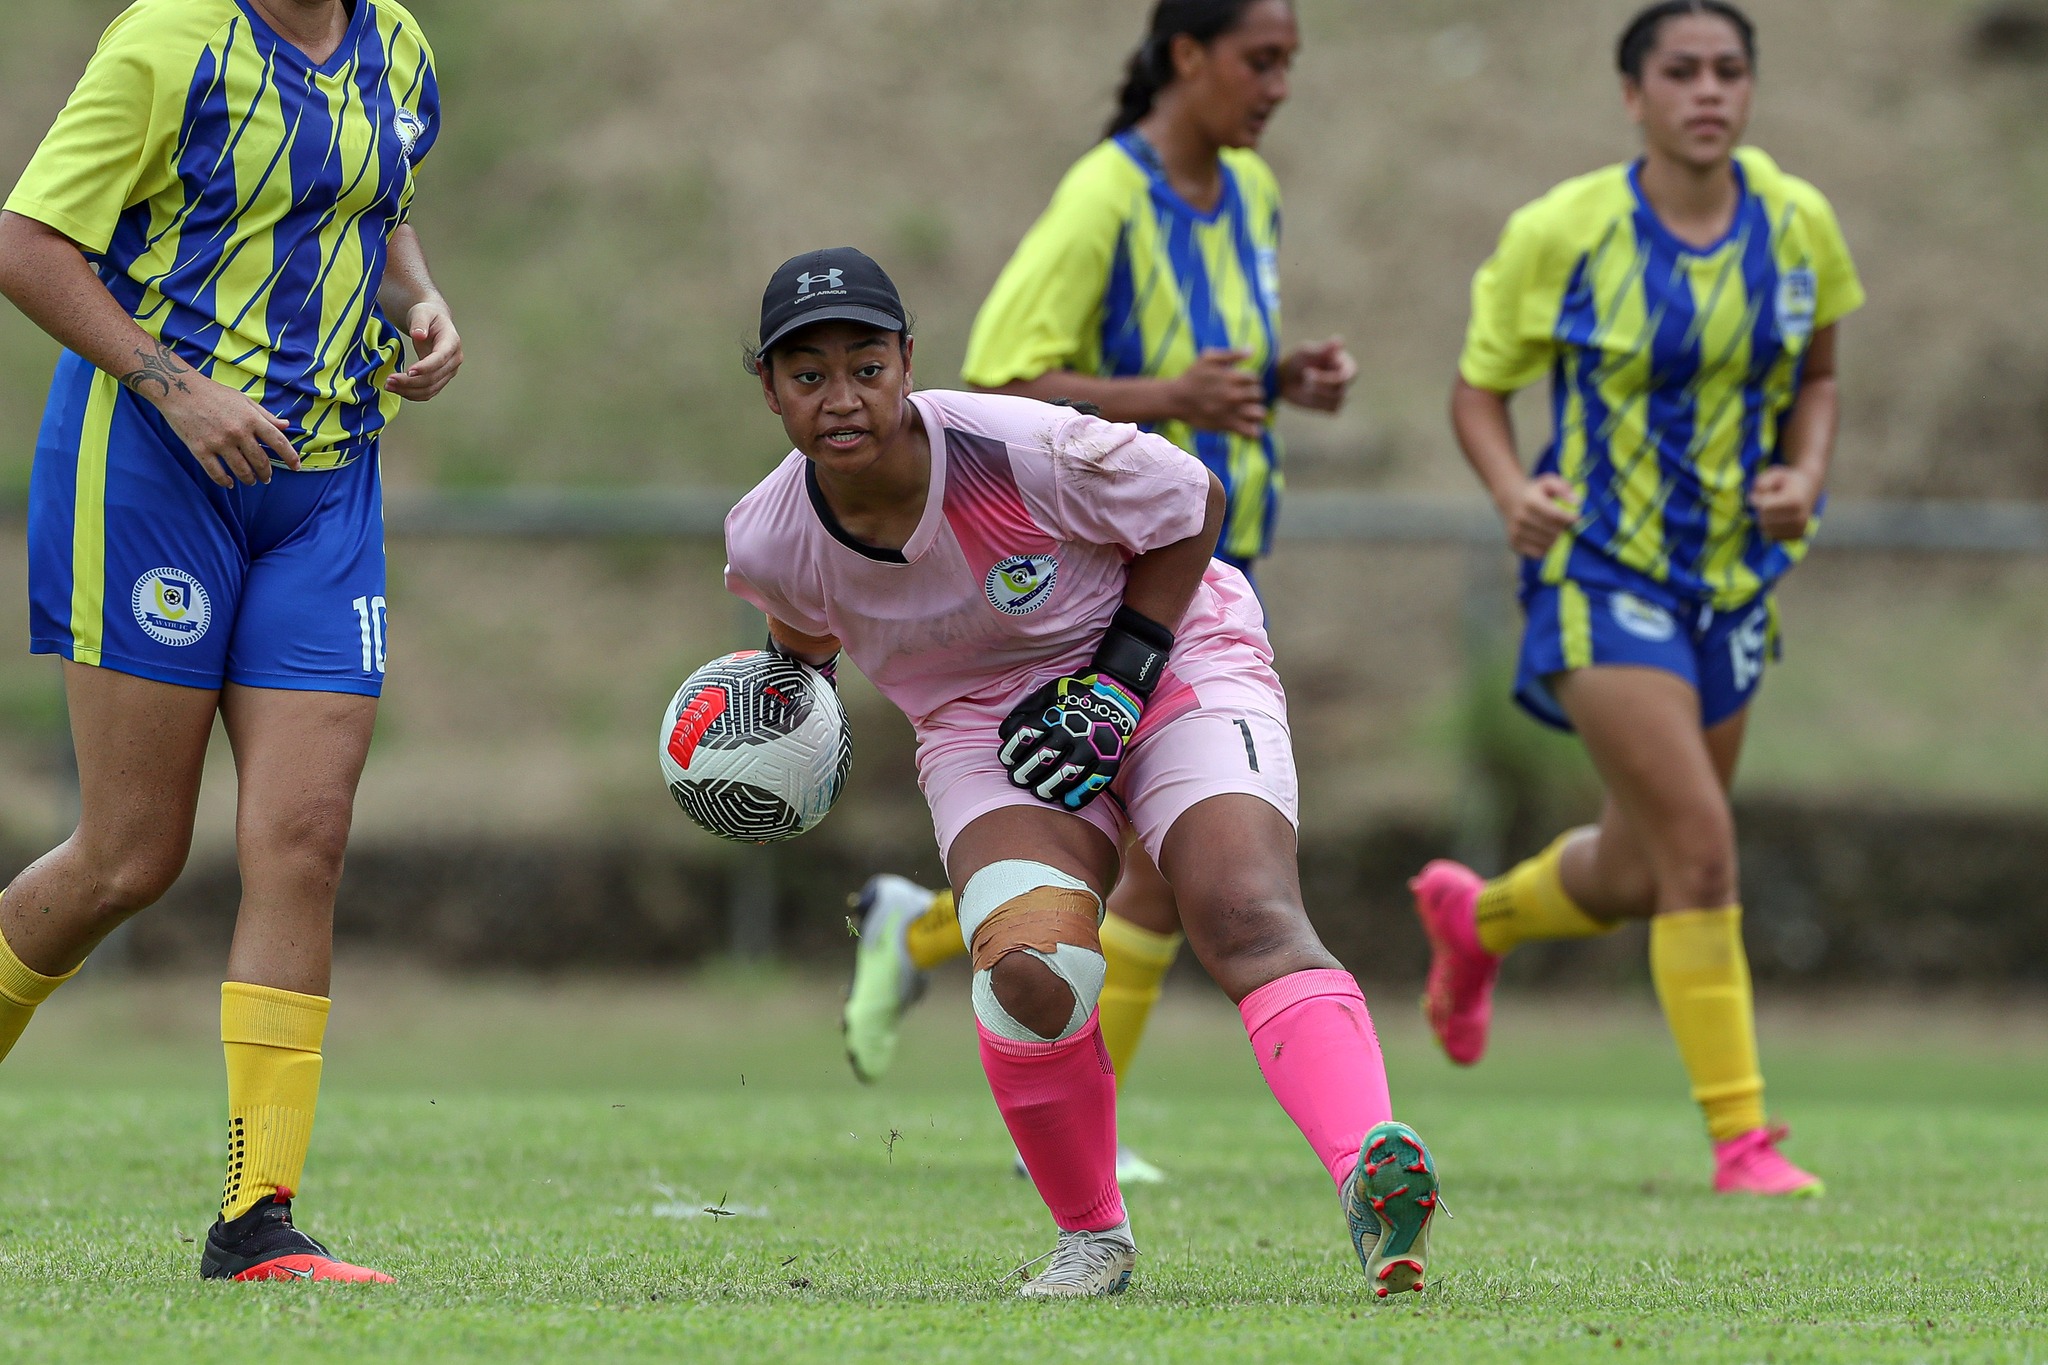 Avatiu FC bows out of OFC Women’s Champions League without a win